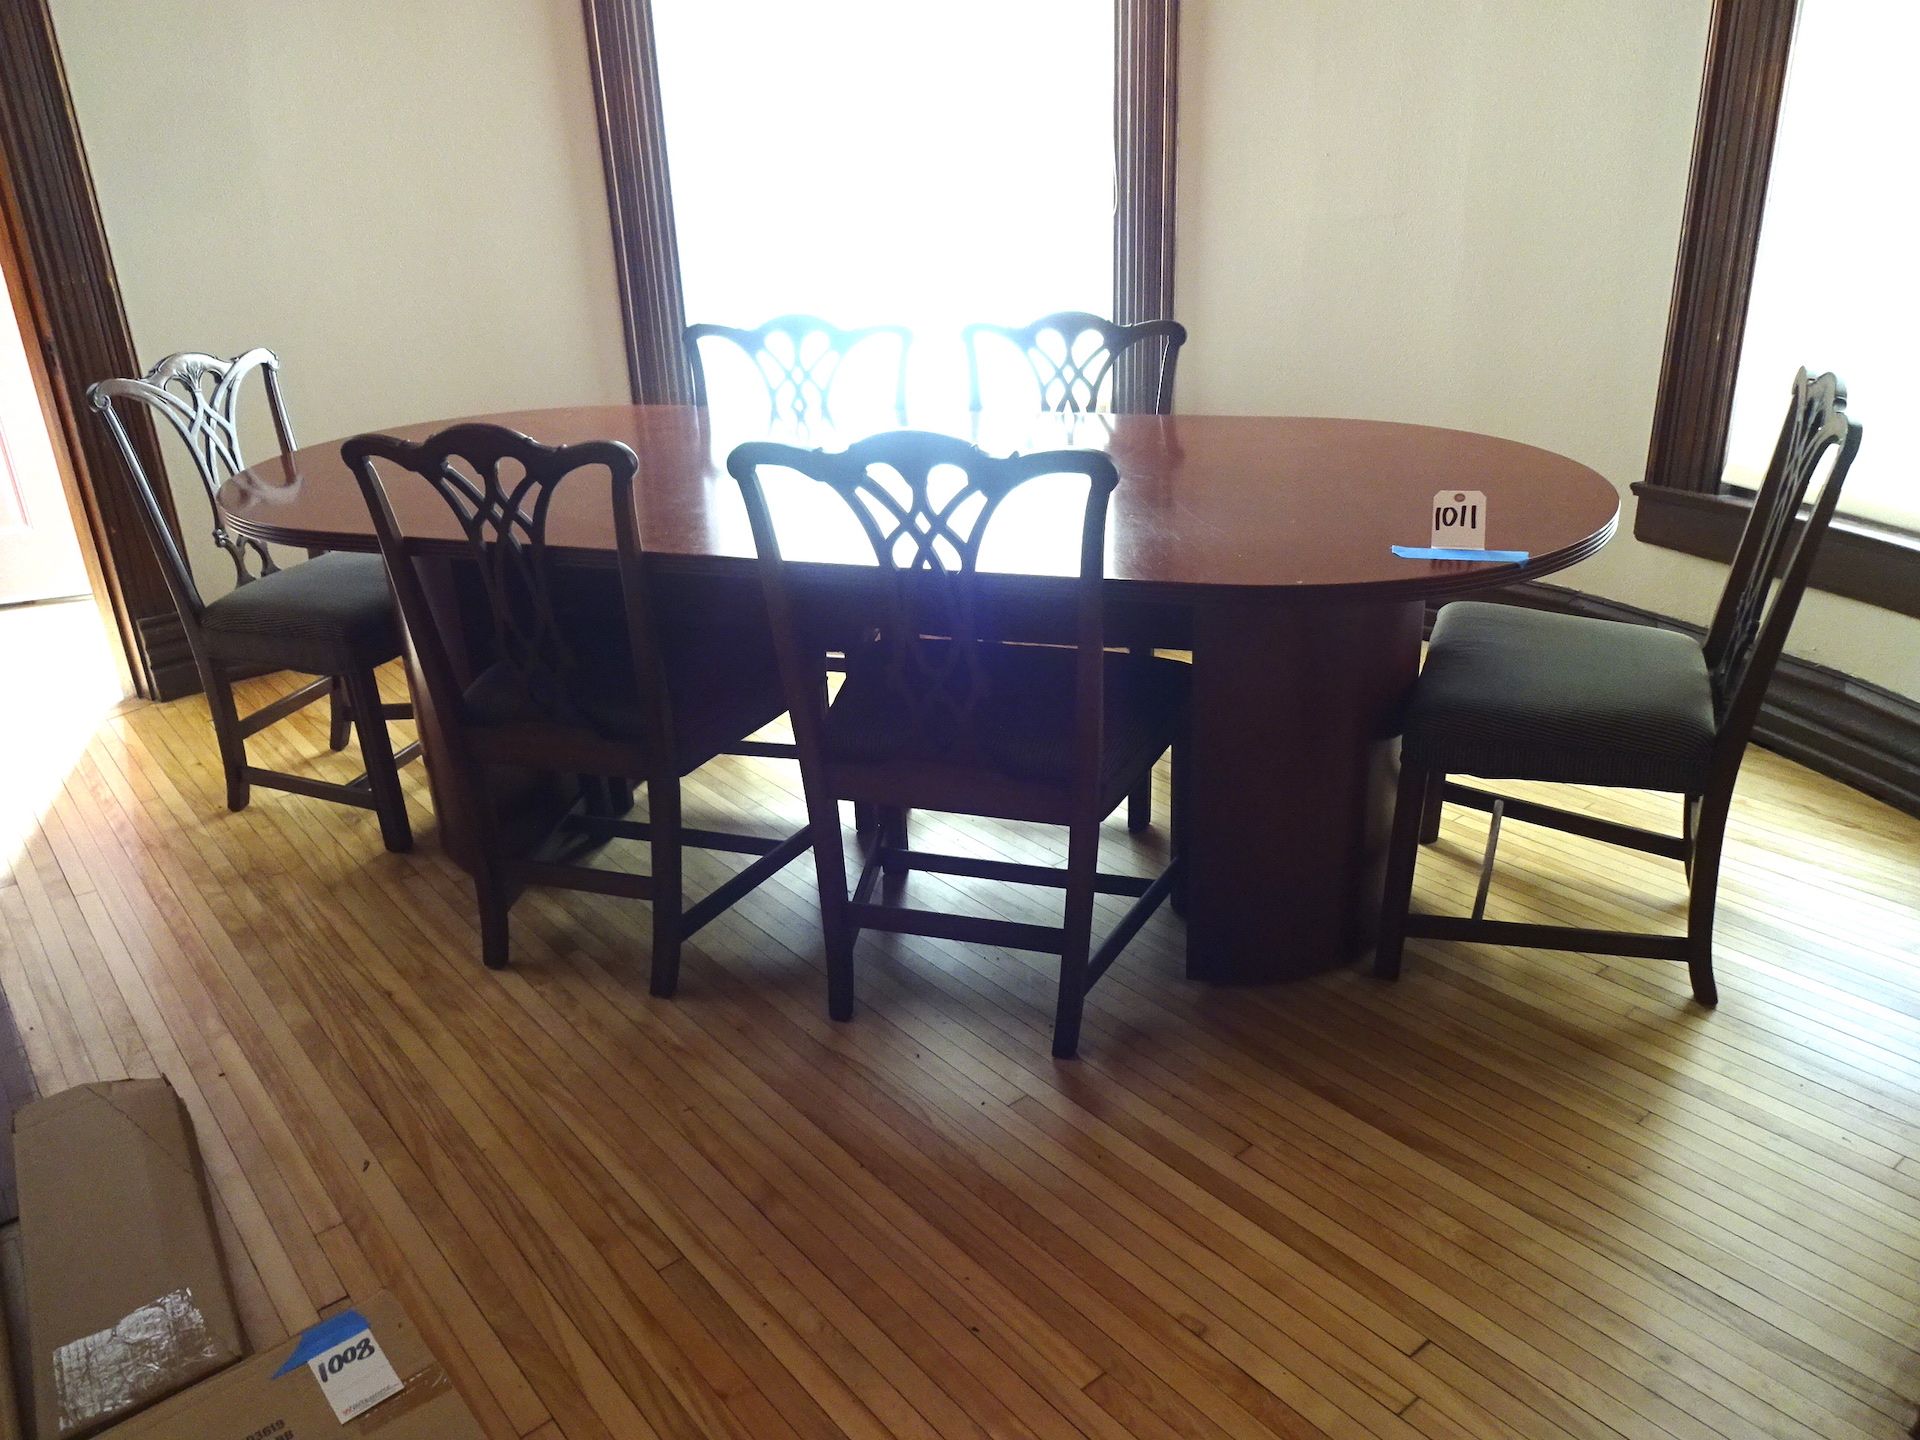 CONFERENCE TABLE & SIX CHAIRS (LOCATION - 6TH STREET)